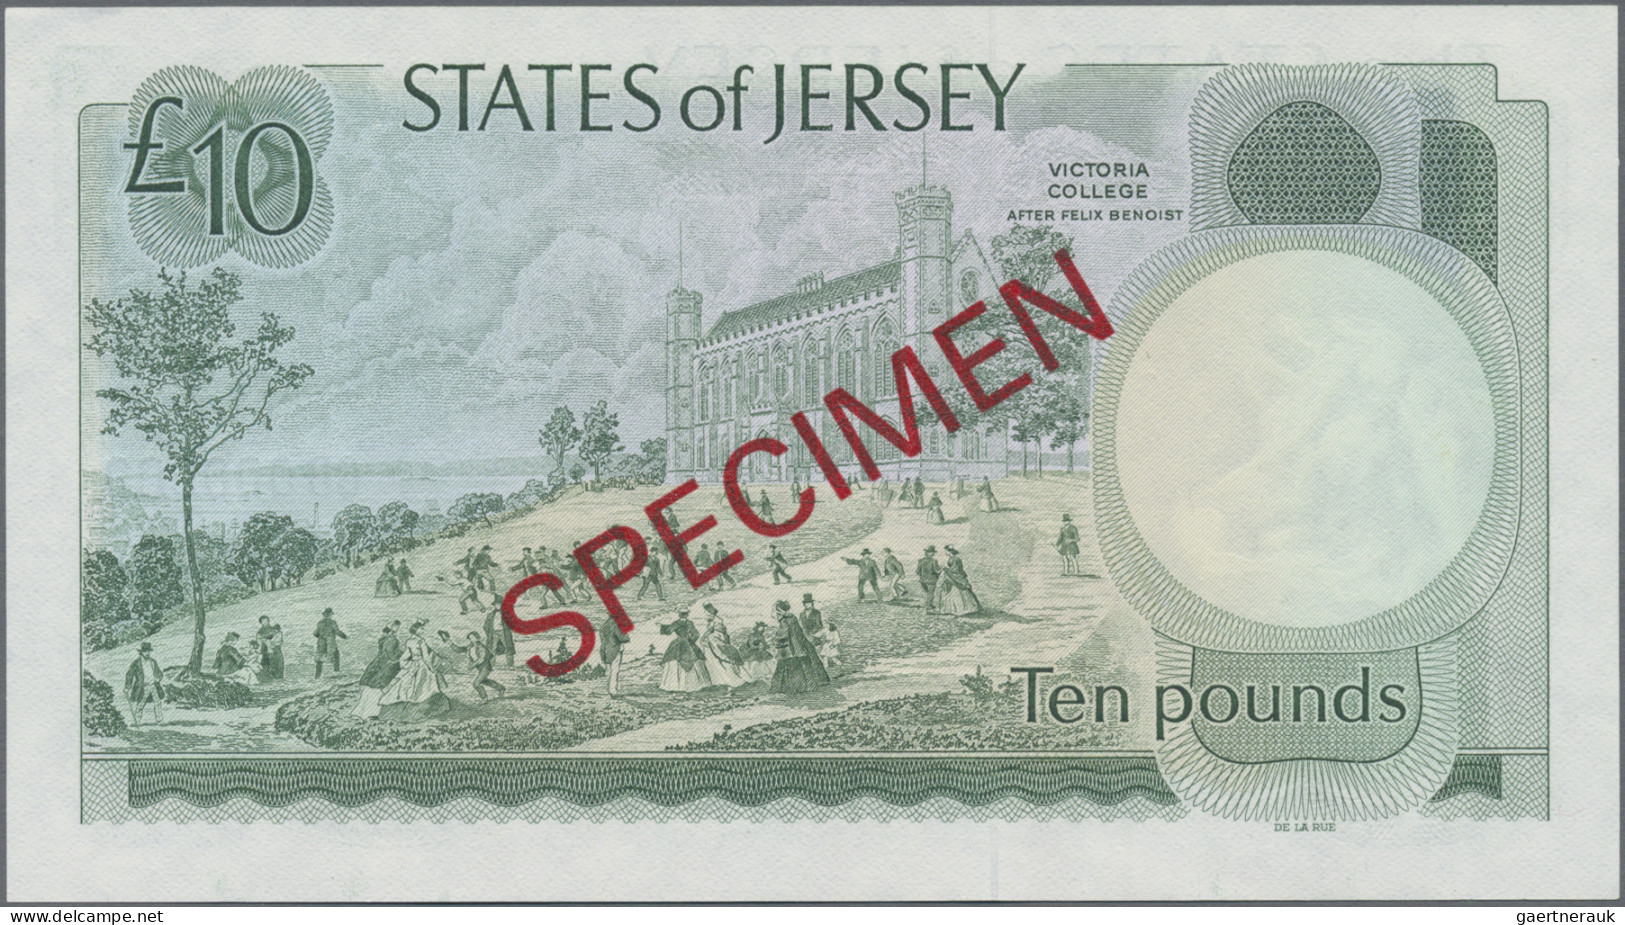 Jersey: The States of Jersey, lot with 6 banknotes, series 1983/85, with 1 Pound